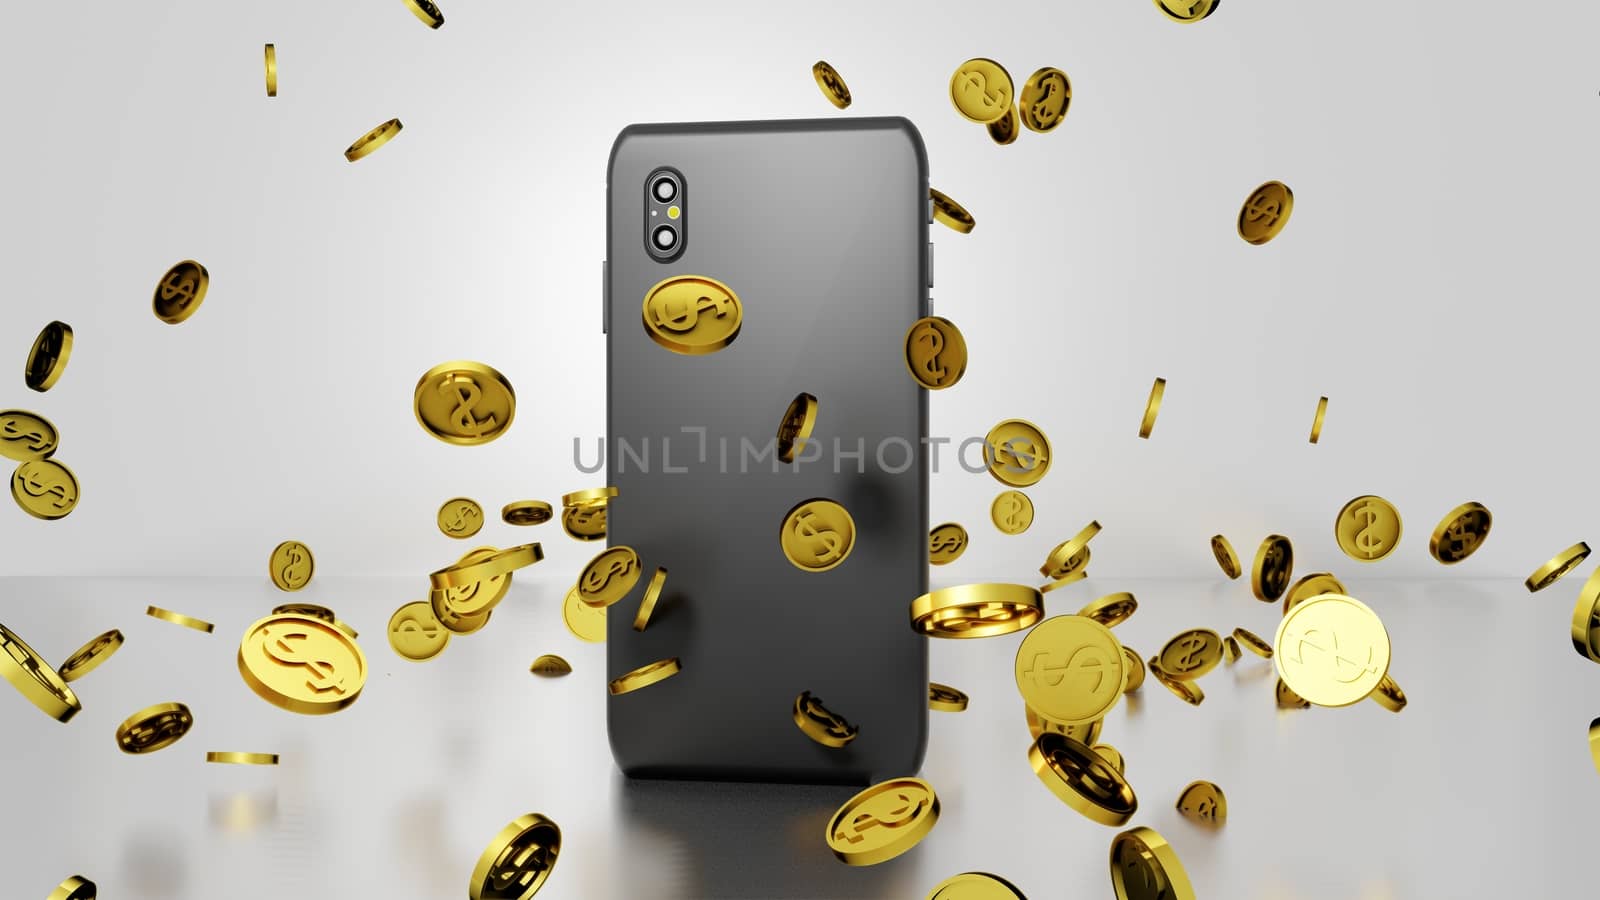 8K 3D Render Back of the Black color Smartphone with Golden Dollar Coins Falling and Bouncing on the Floor by ariya23156